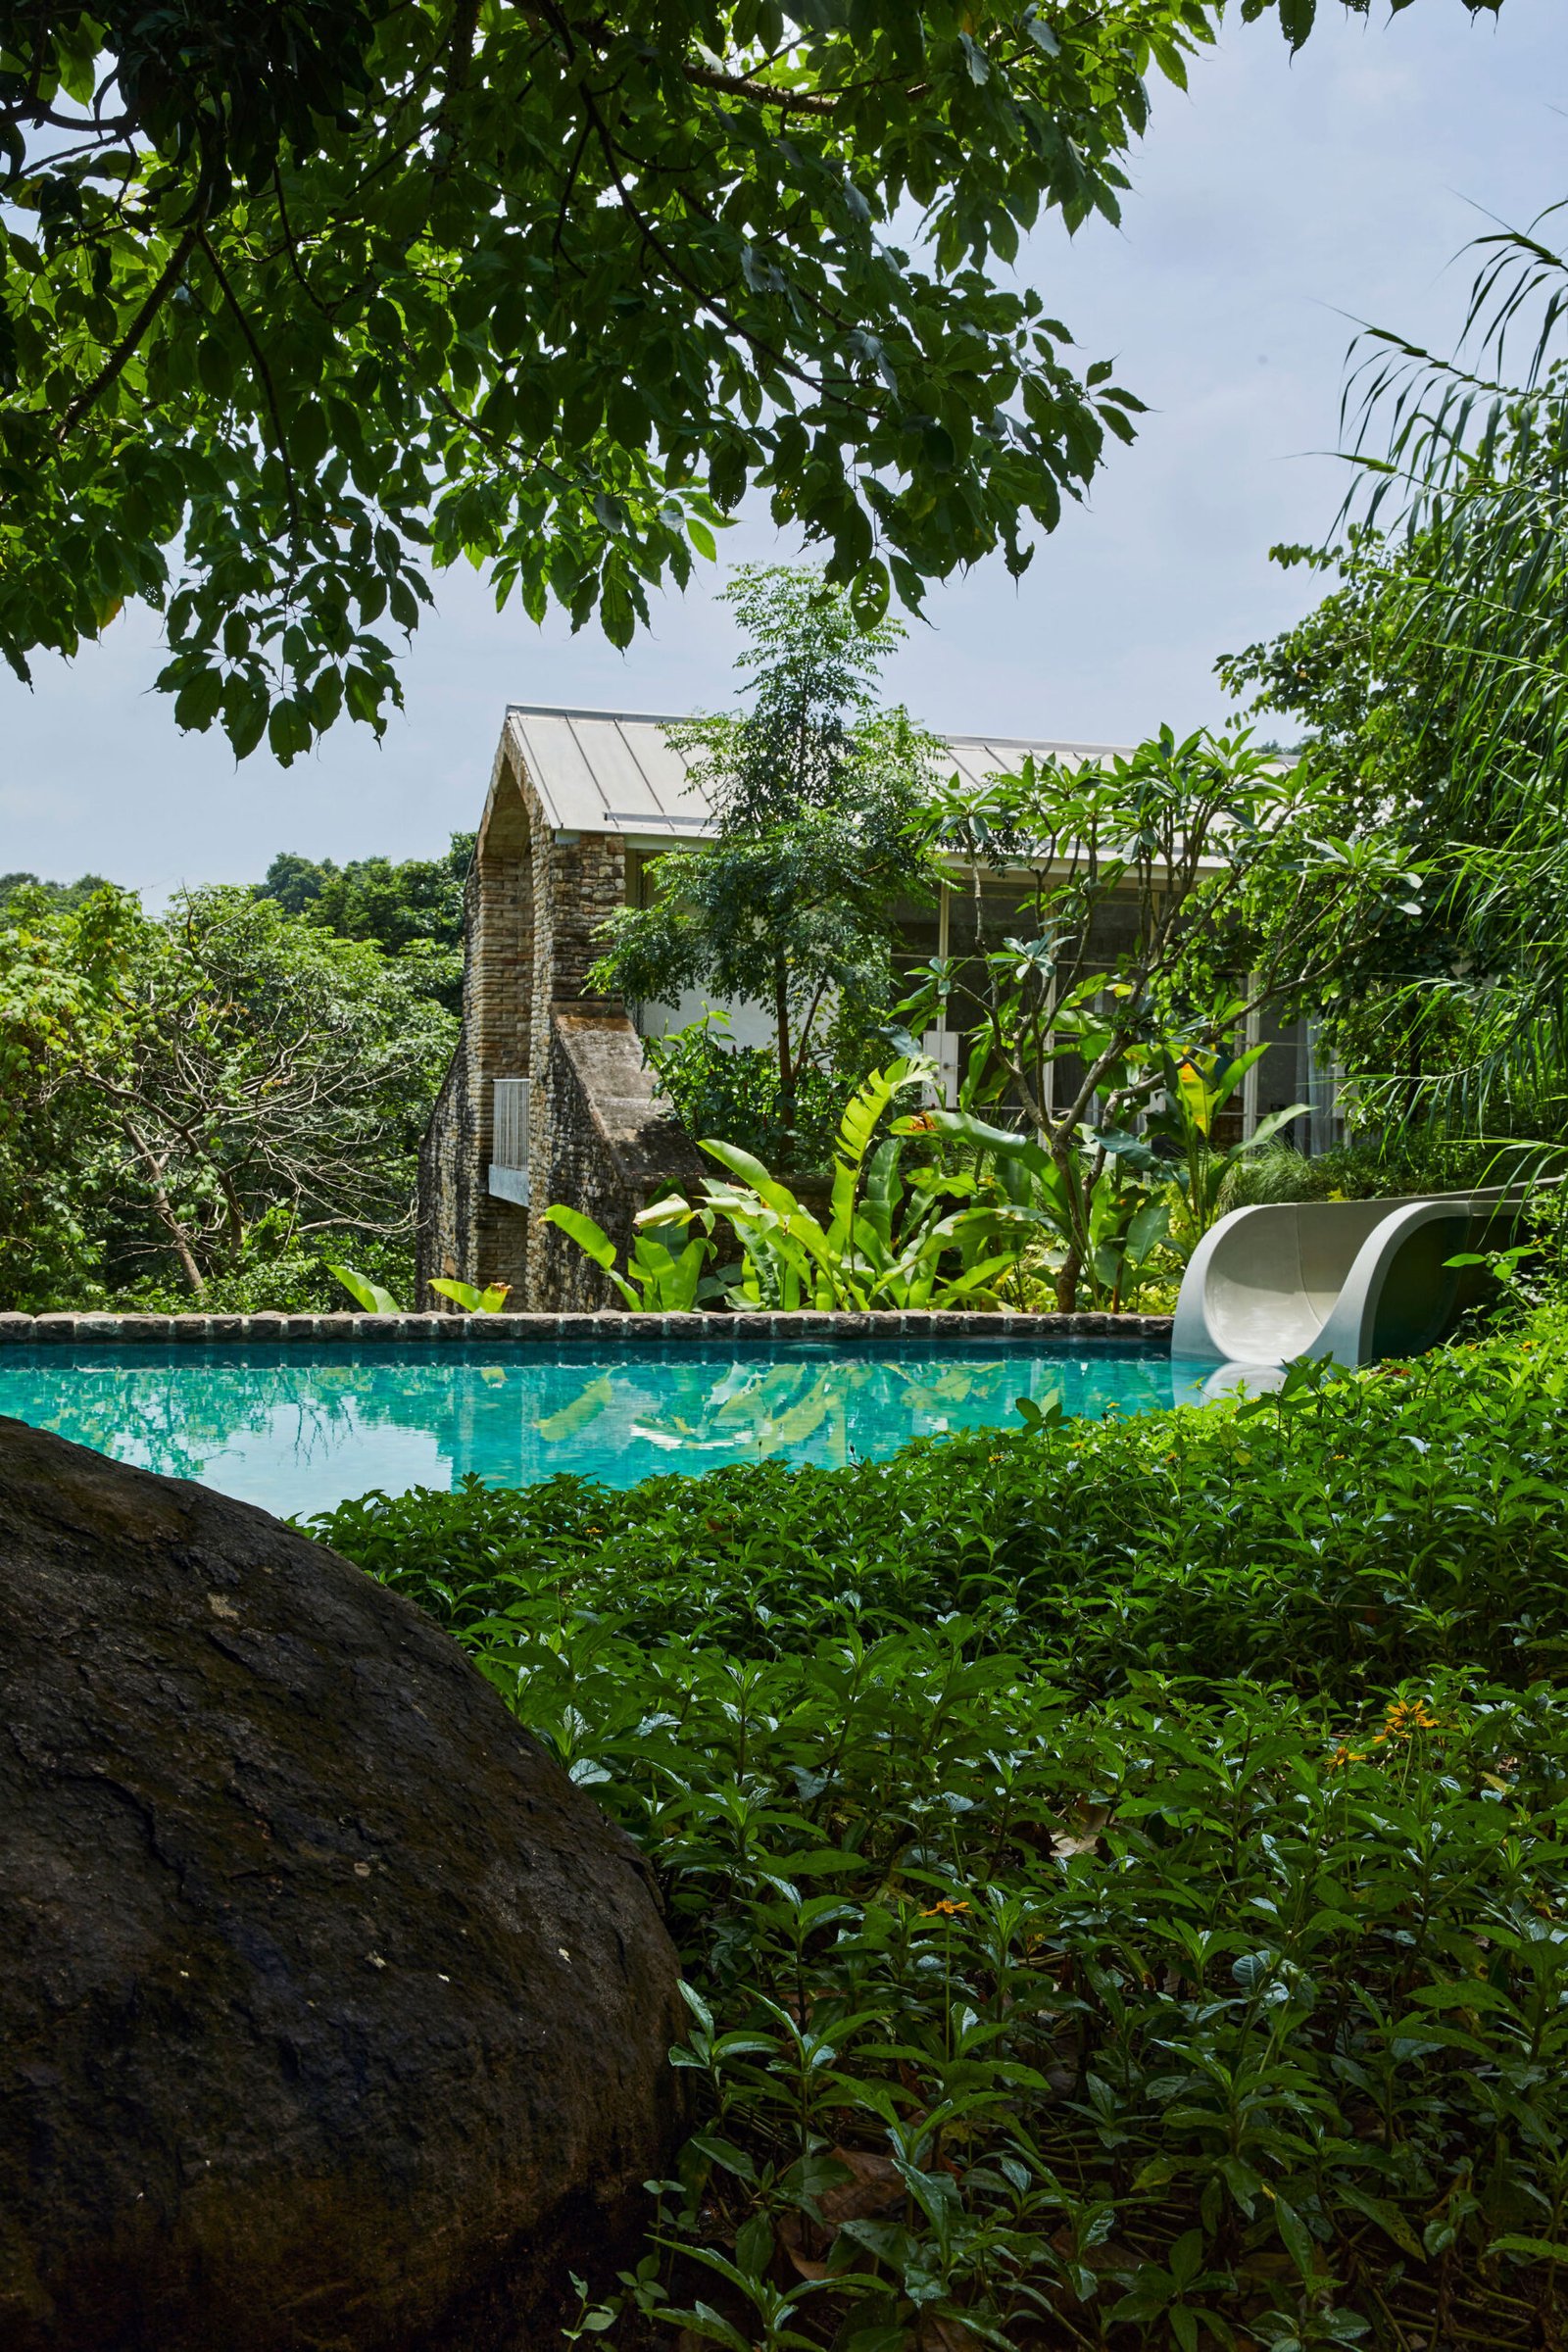 plunge pool with waterslide in tropical garden